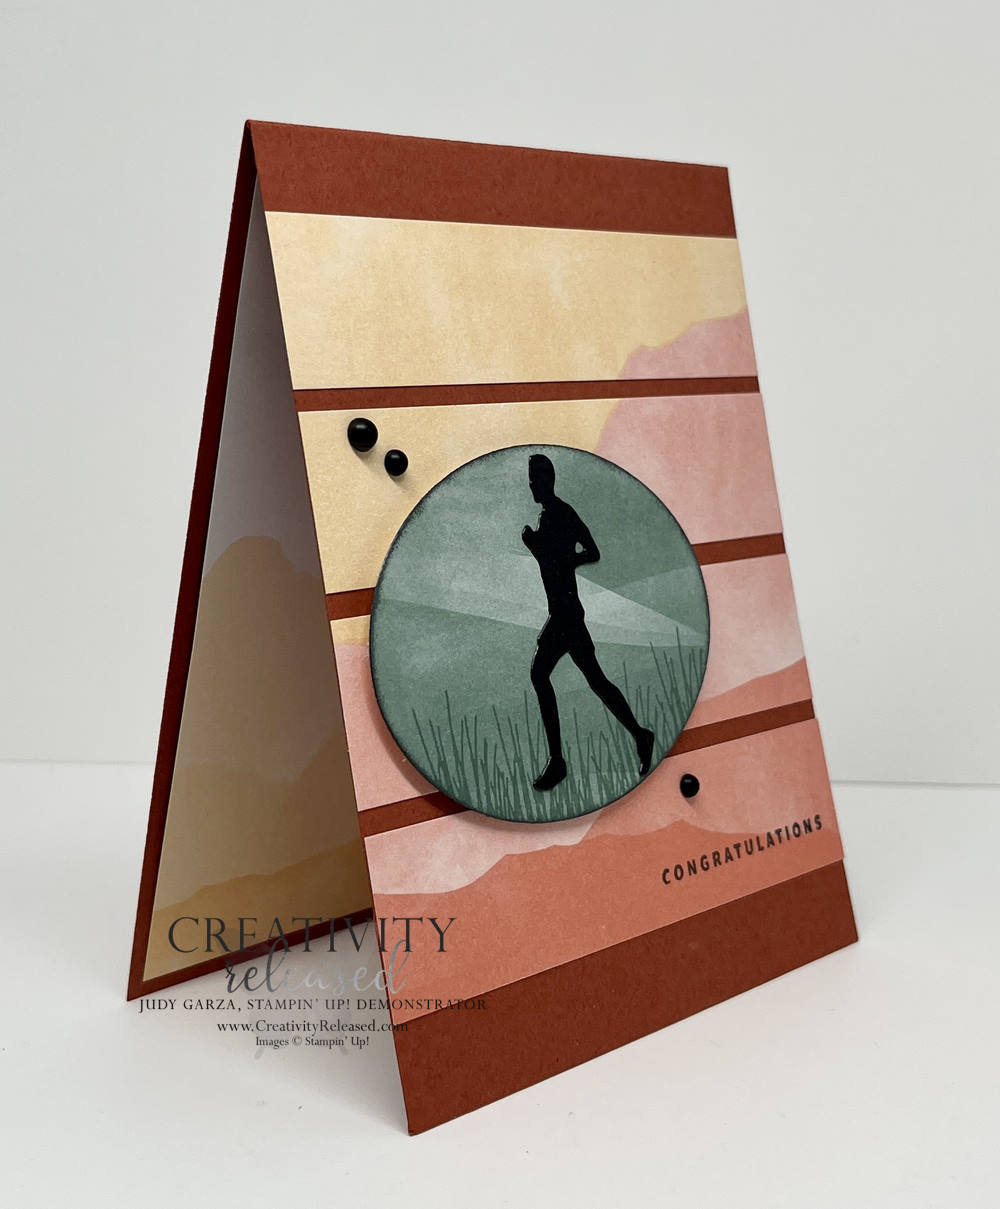 A side view of an outdoorsy card of congratulations. A mountainous background with the silhouette of a runner in a focal oval. All products by Stampin' Up!